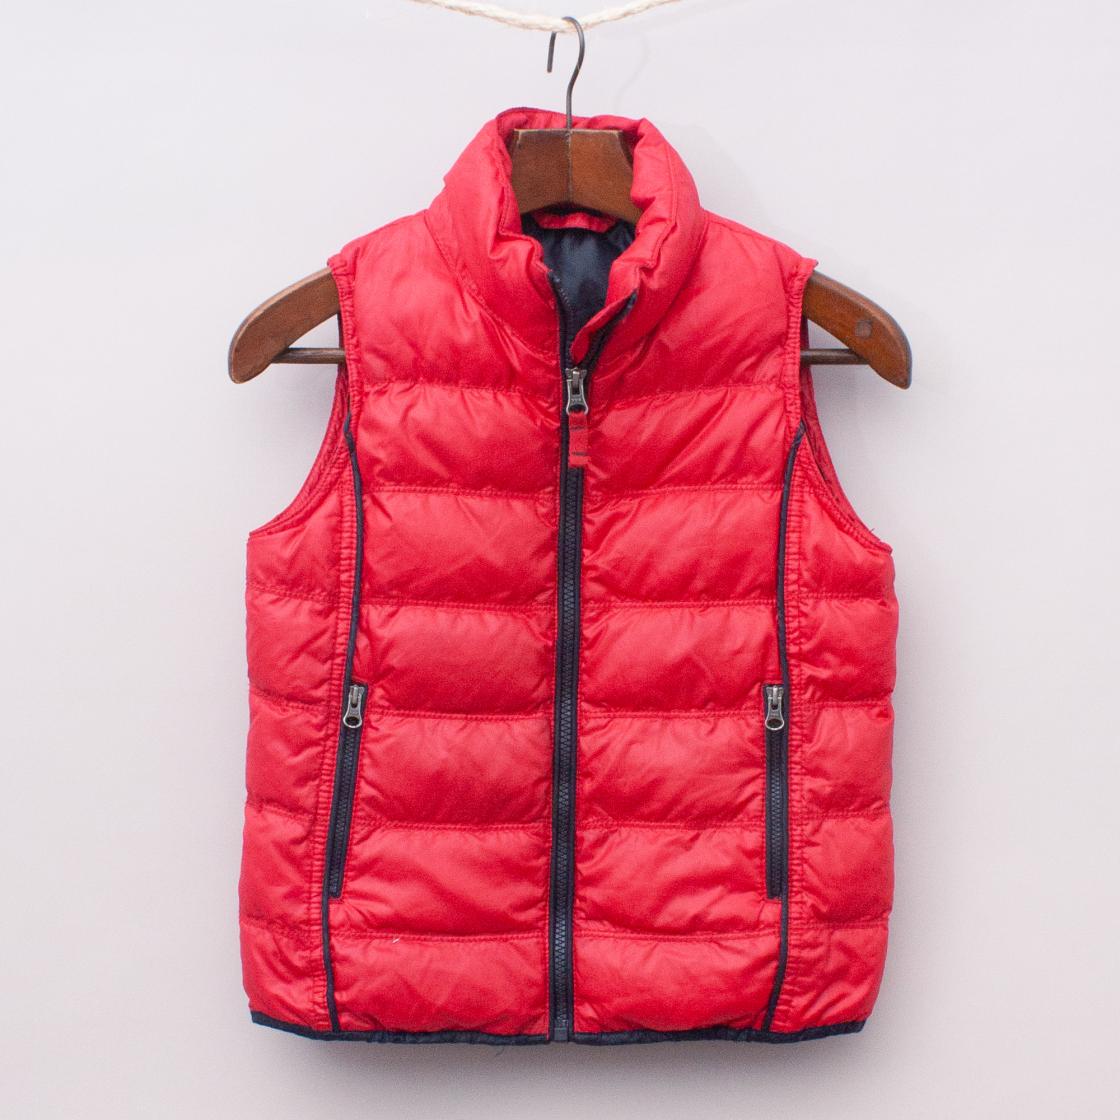 Antarctic Research Padded Vest